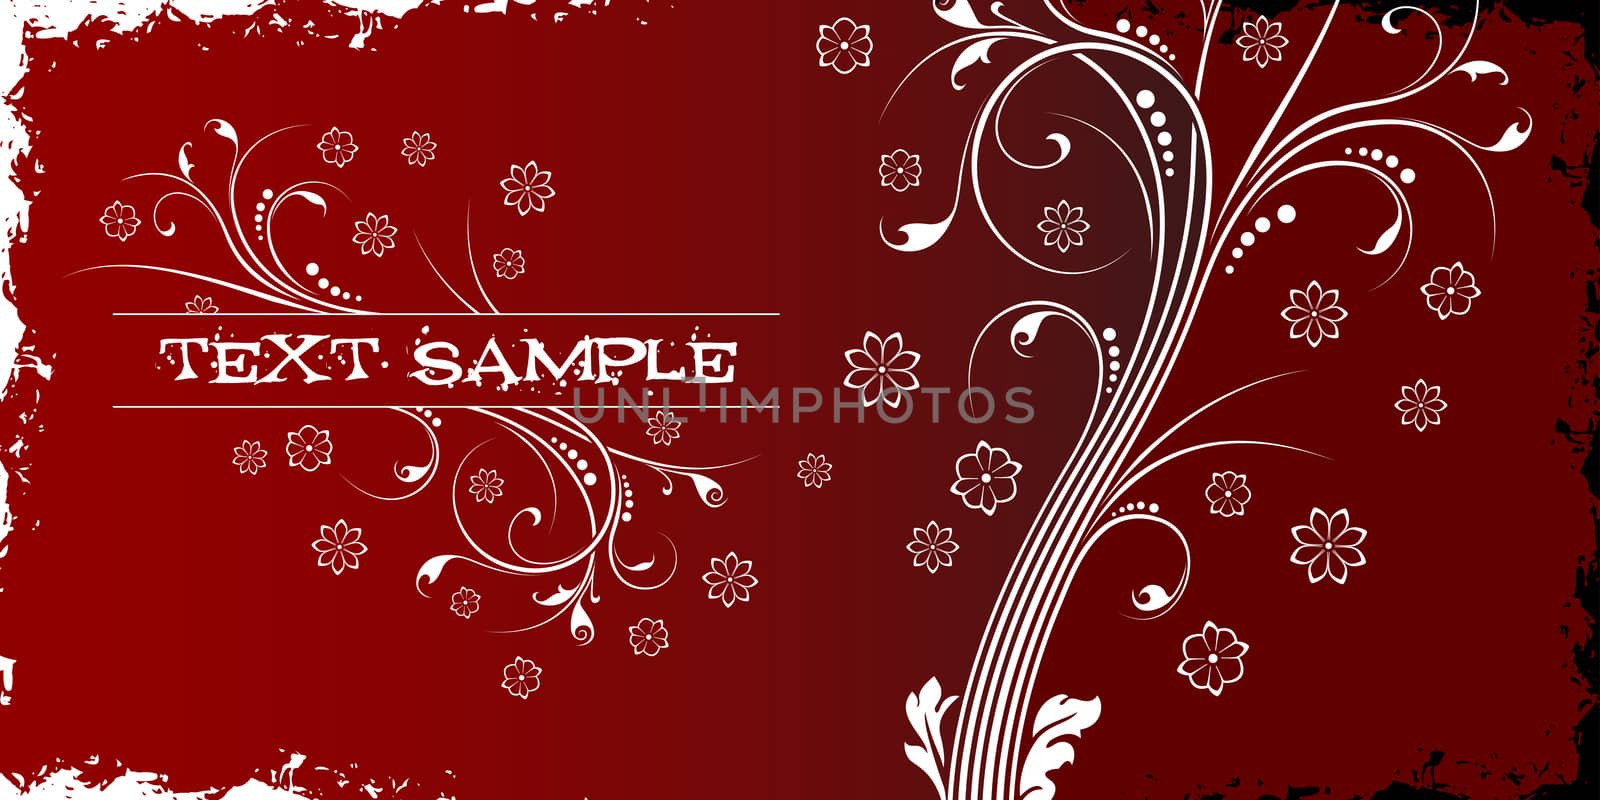 Abstract grunge background witn floral scrolls in red color and text decoration